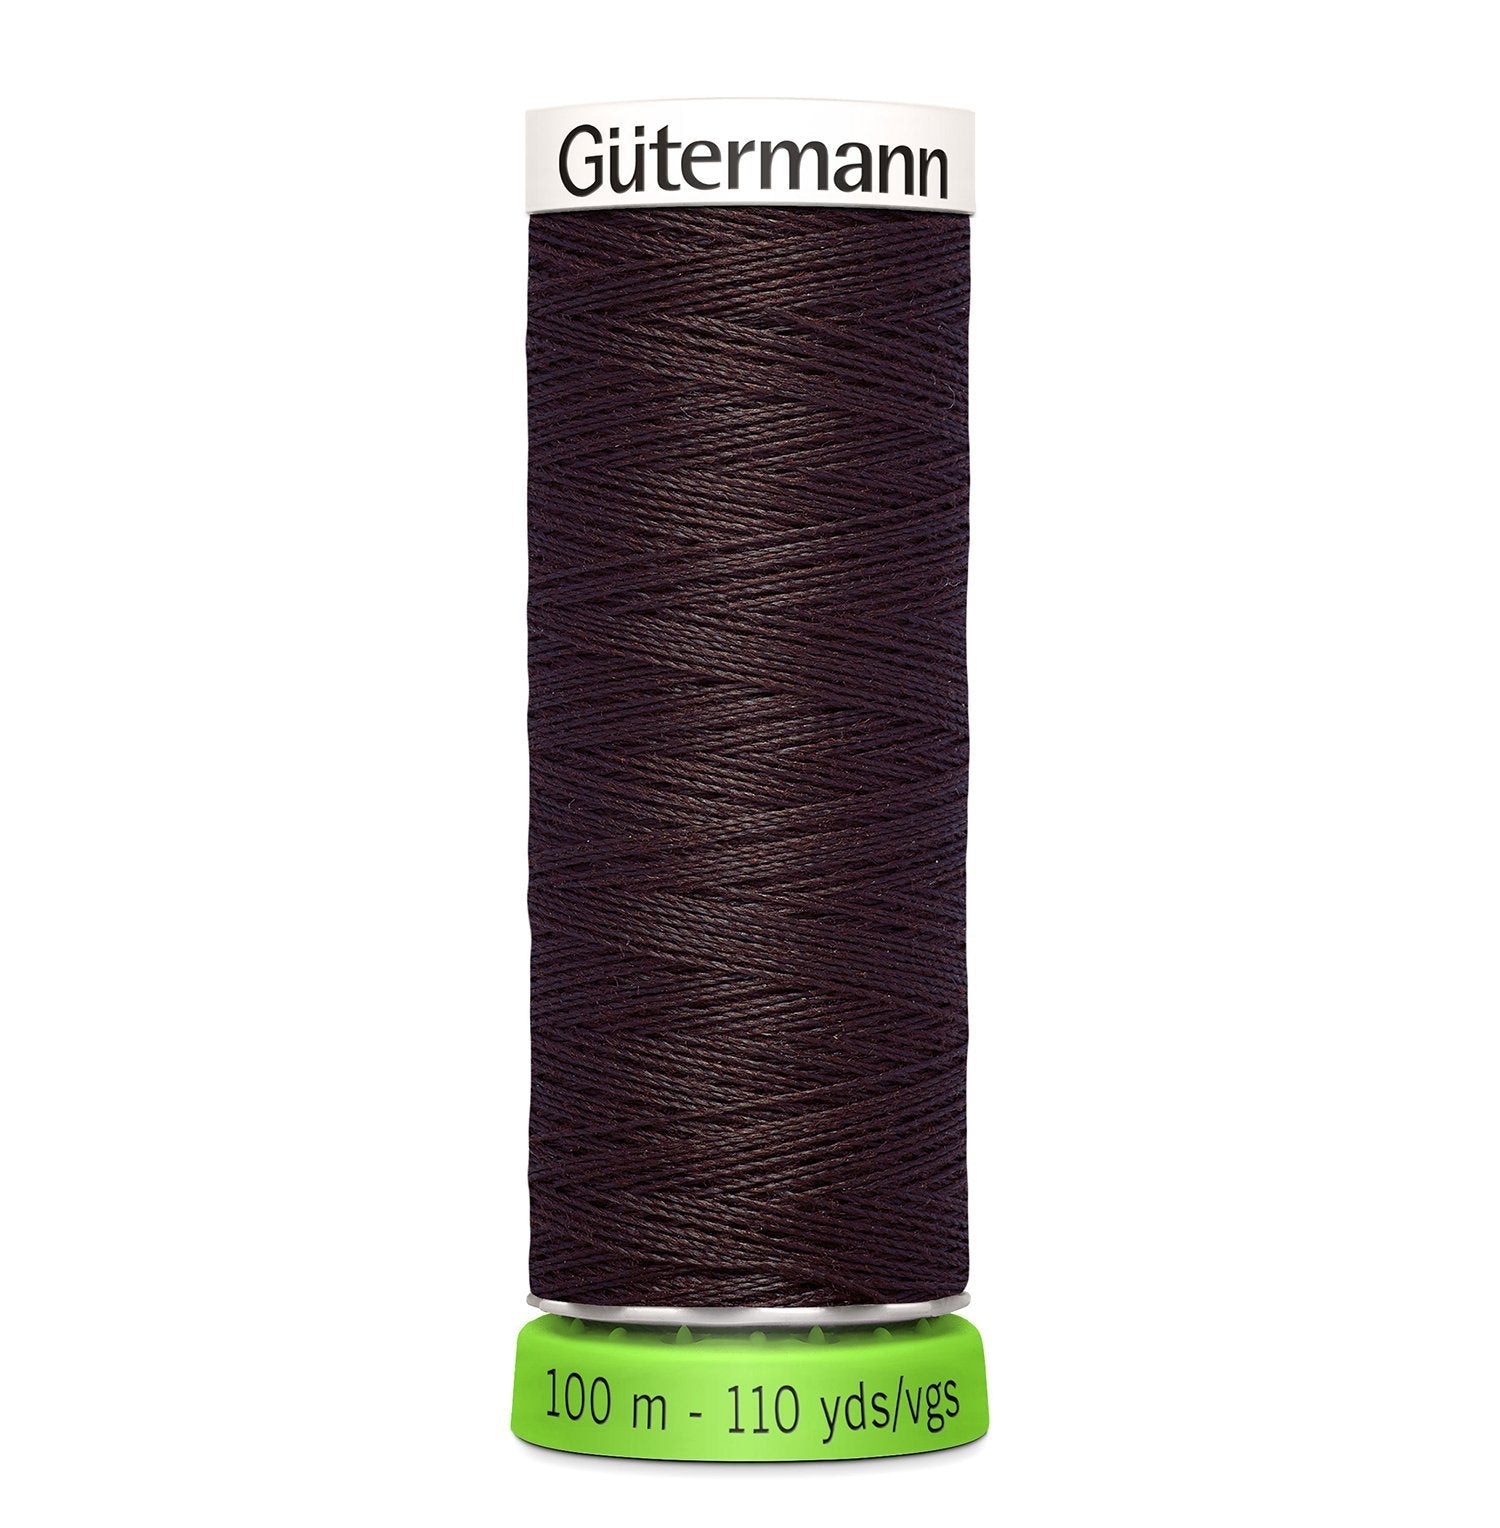 Gutermann Recycled Thread 100m, Colour 23 from Jaycotts Sewing Supplies